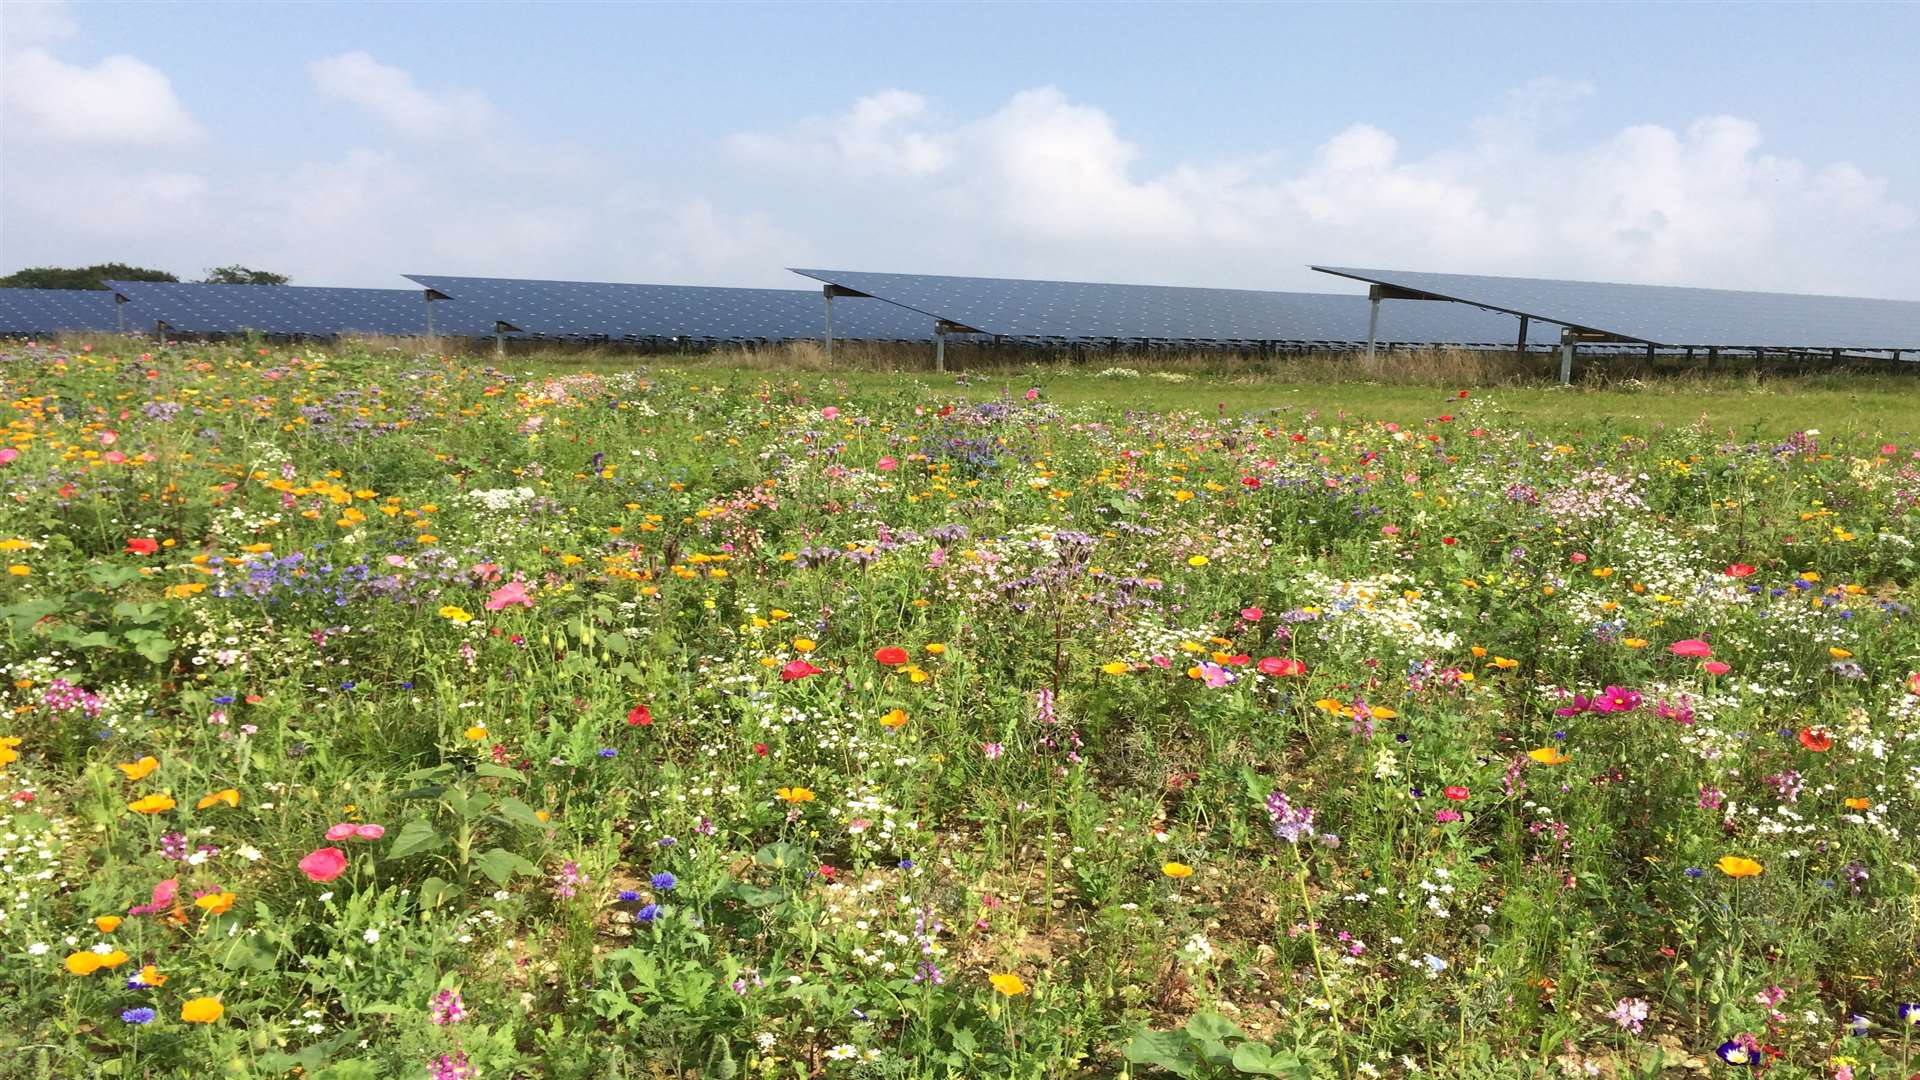 The 67-acre solar farm is now up and running